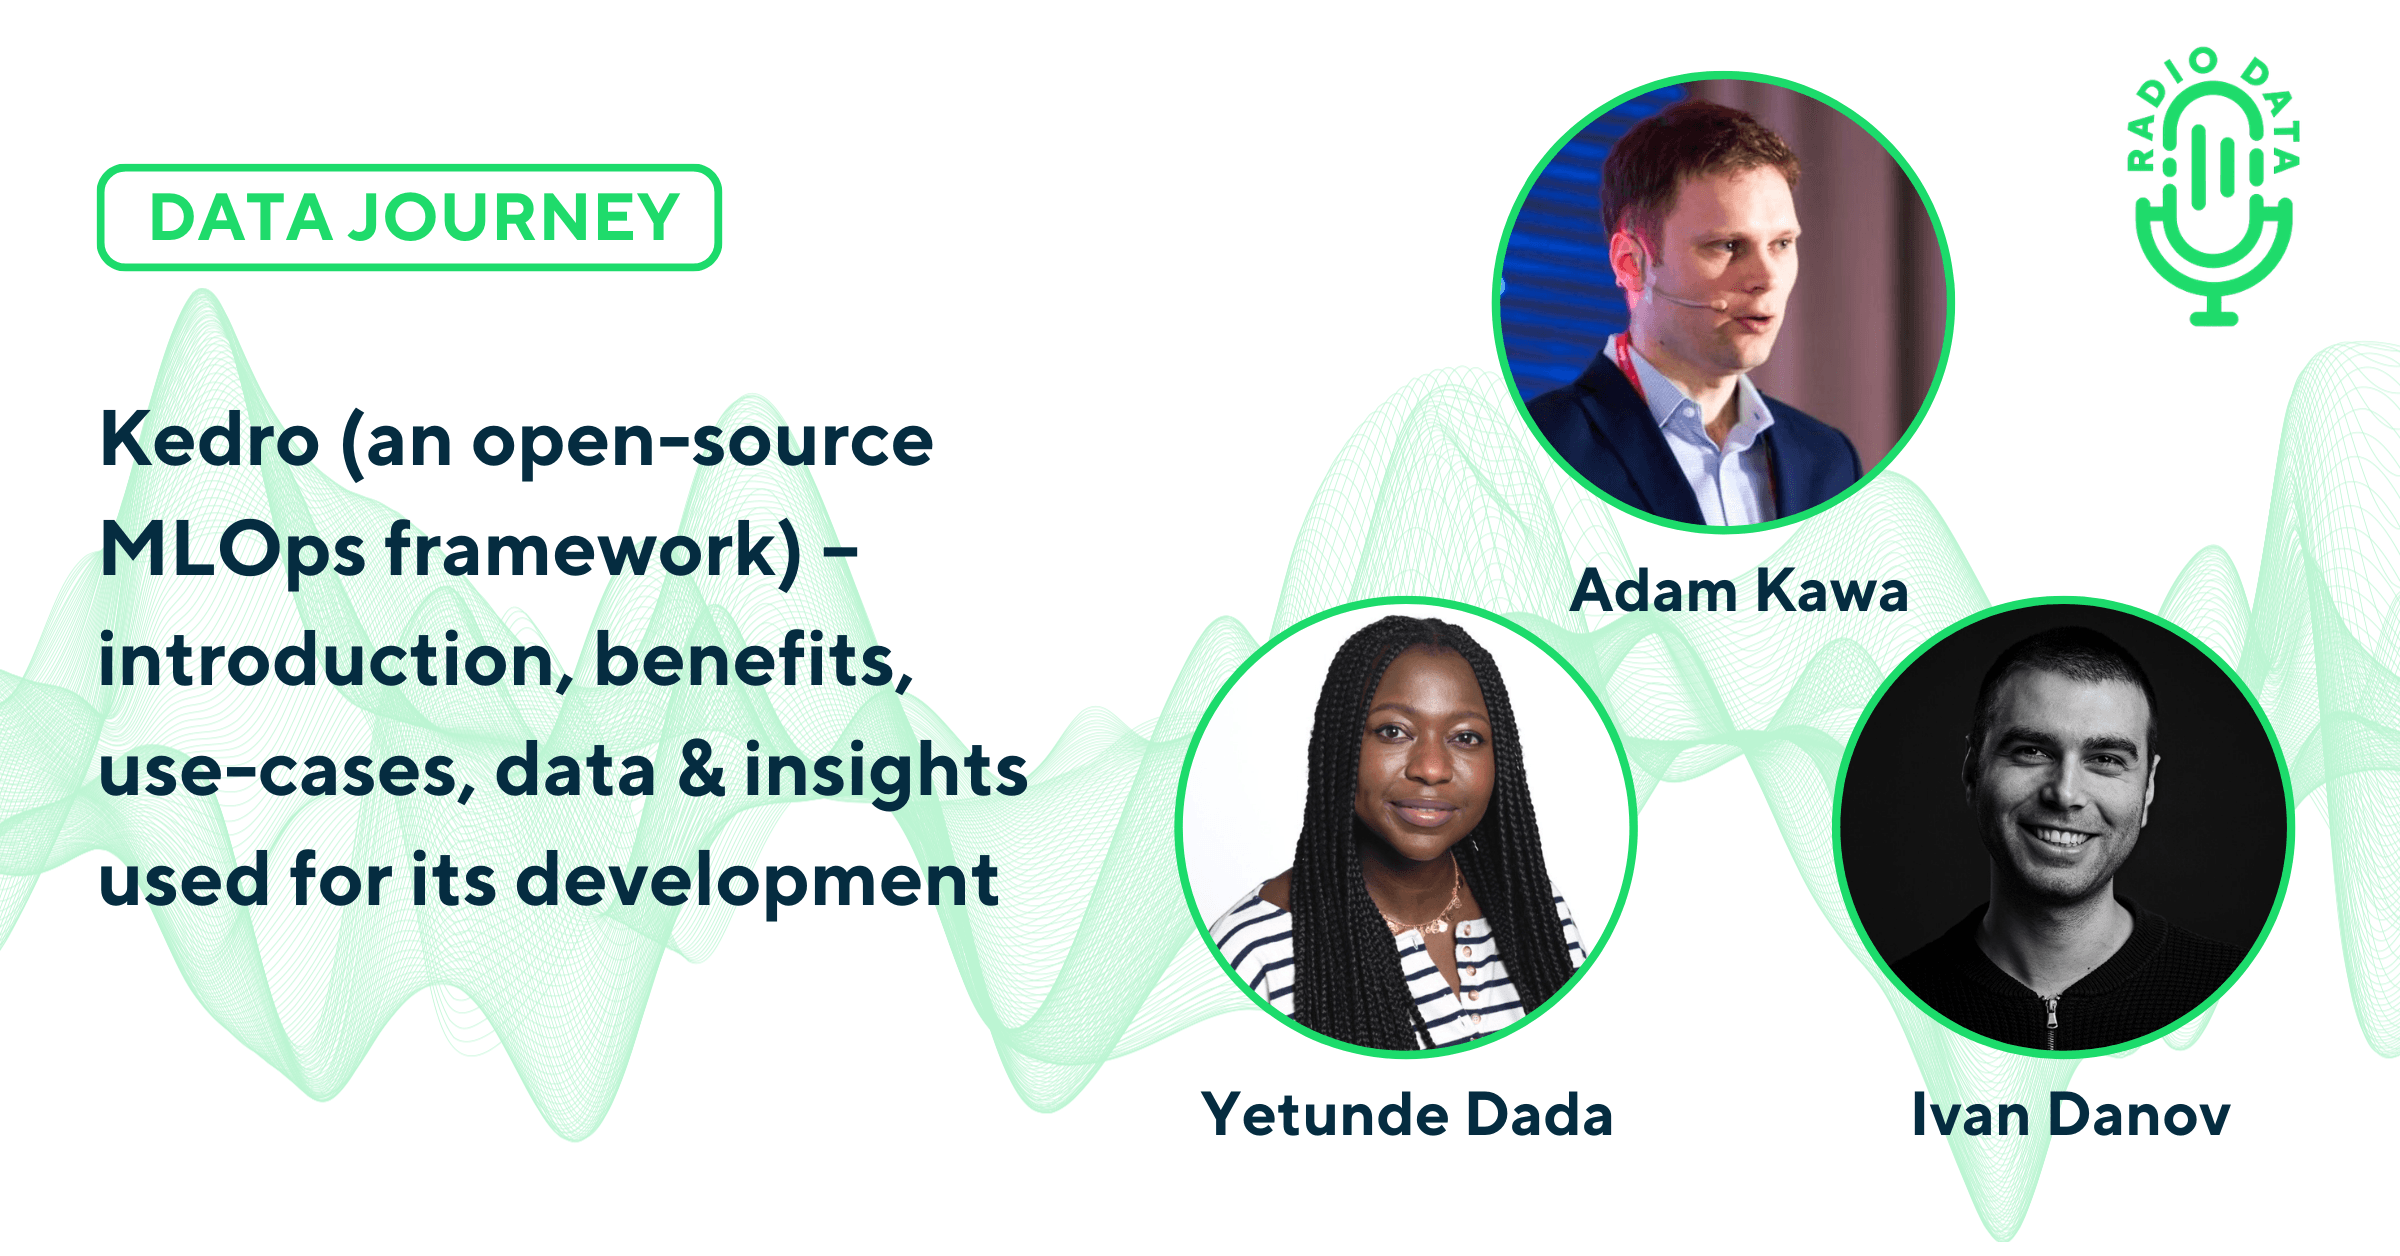 Data Journey with Yetunde Dada & Ivan Danov (QuantumBlack) – Kedro (an open-source MLOps framework) – introduction, benefits, use-cases, data & insights used for its development